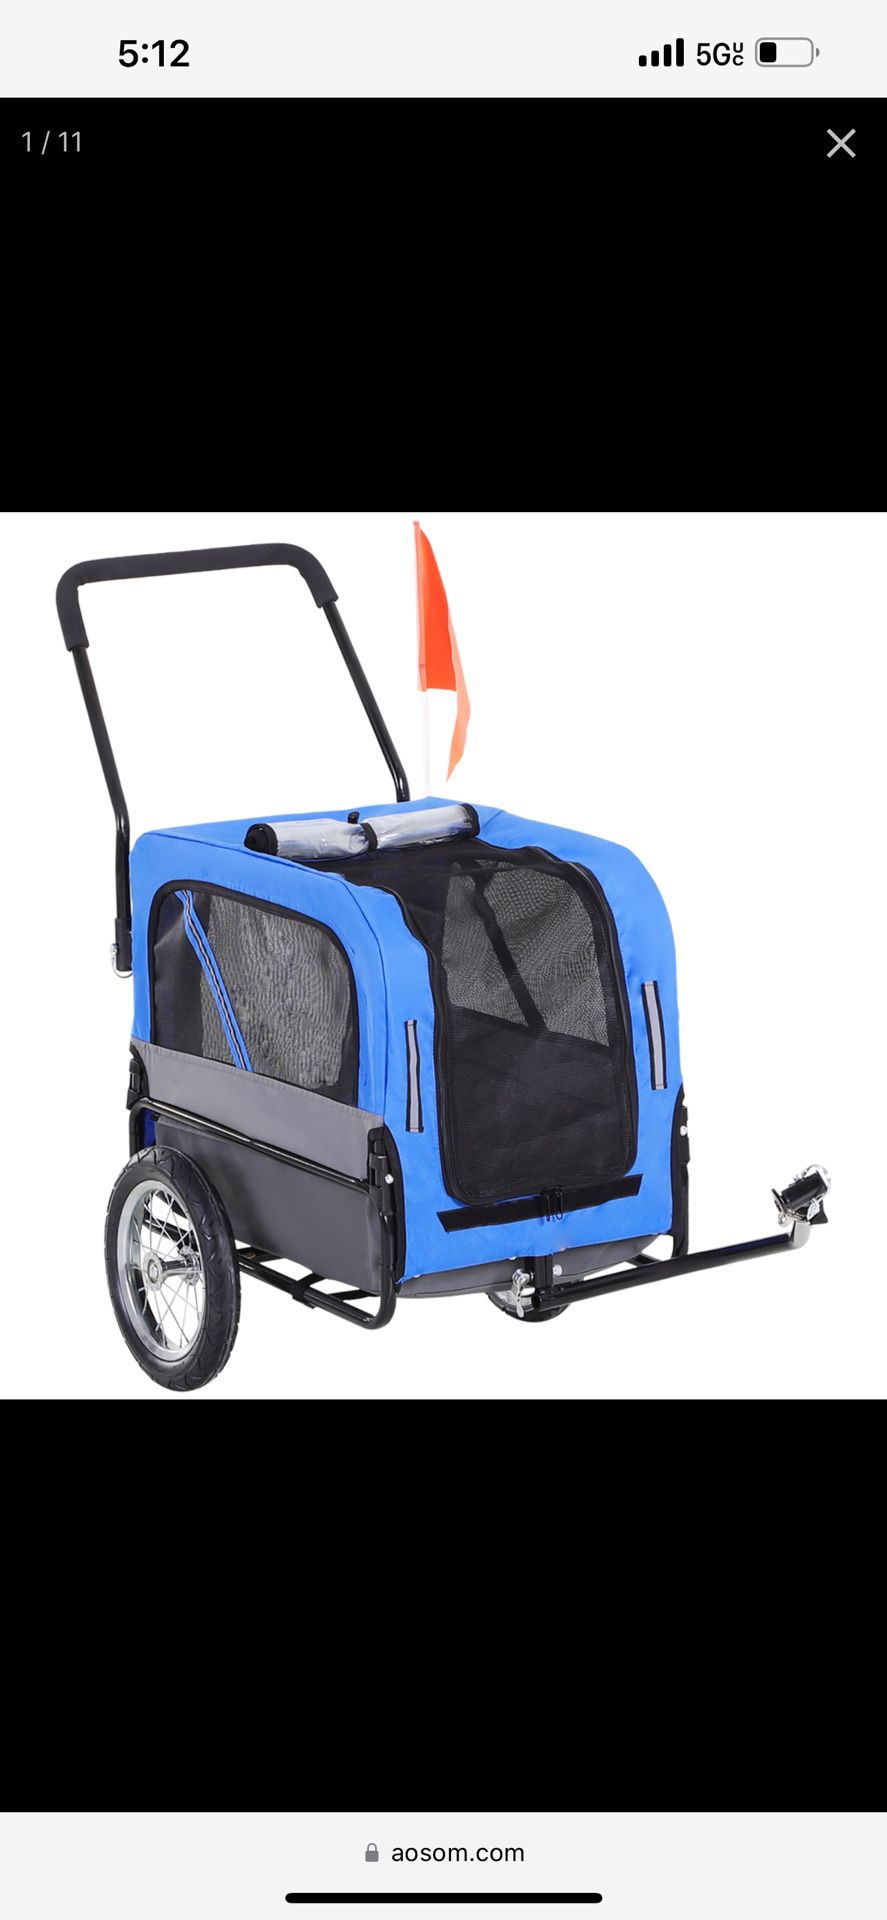 New in box 2-in-1 Small Dog Bike Trailer and Bike Stroller with Hitch, Bicycle Trailer Sidecar Bike Wagon Cart Carrier Attachment for Travel, Blue d00